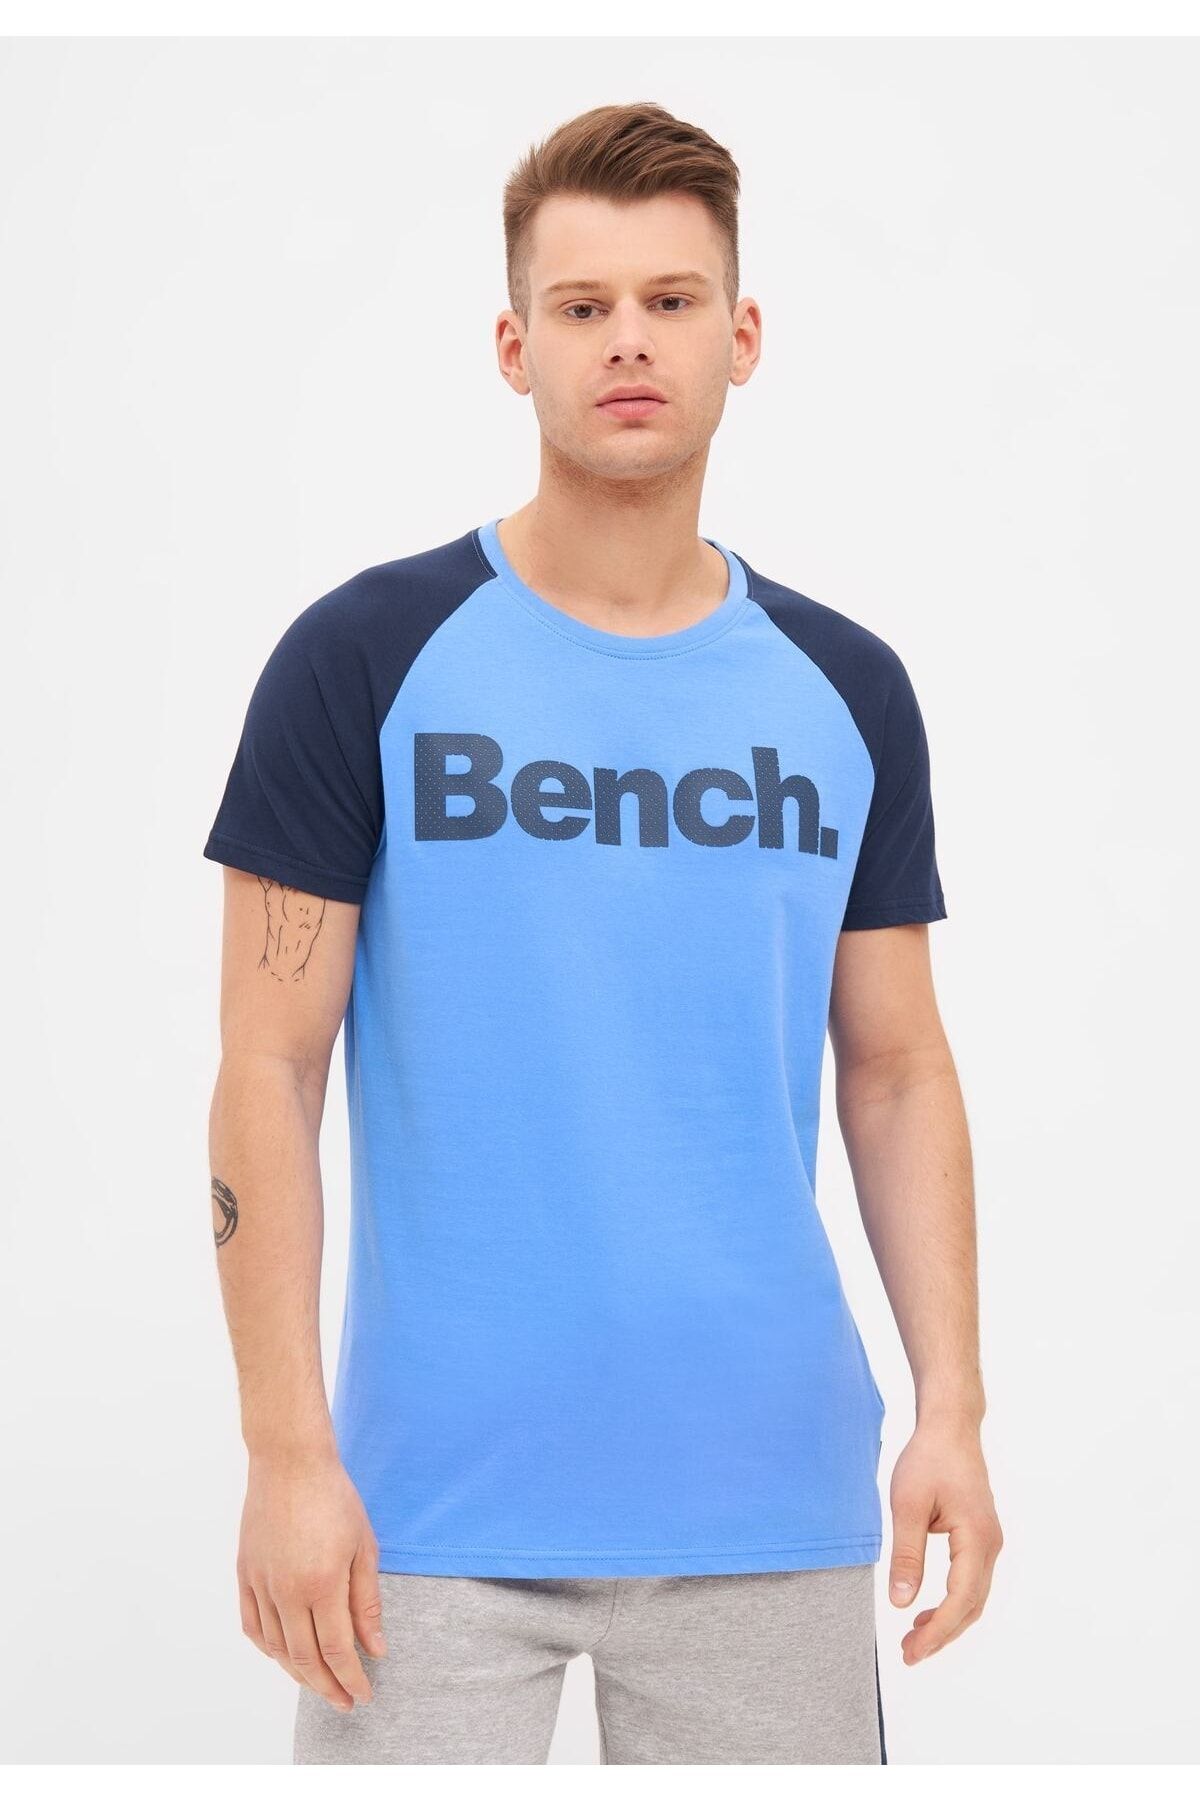 BENCH T-Shirt - Blue - Fitted - Trendyol